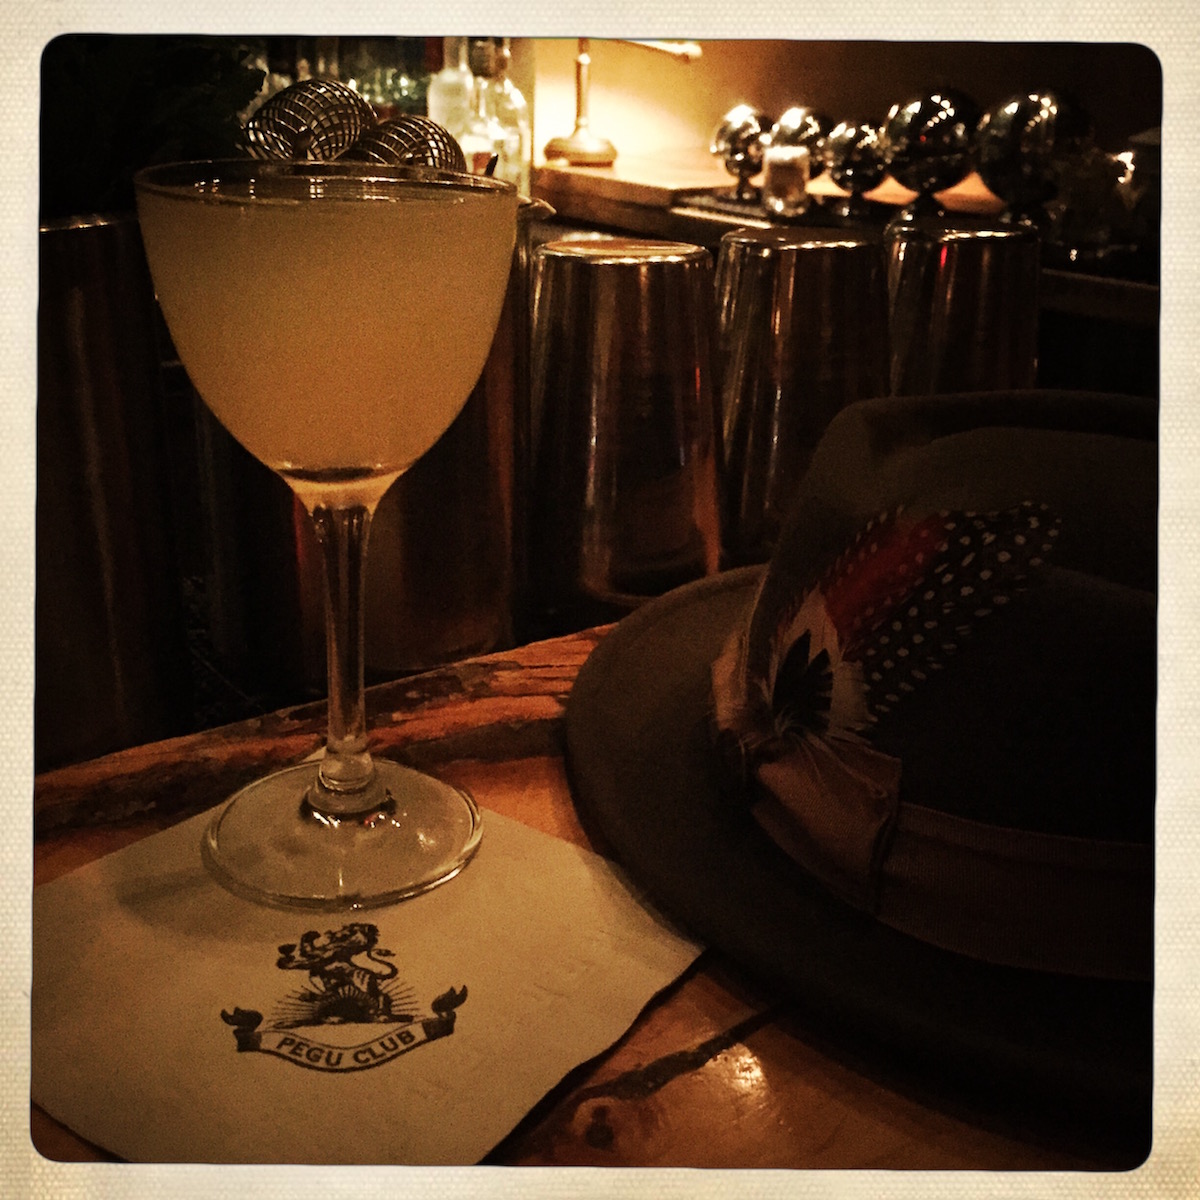 Pegu Club - New York found at The Pouring Tales